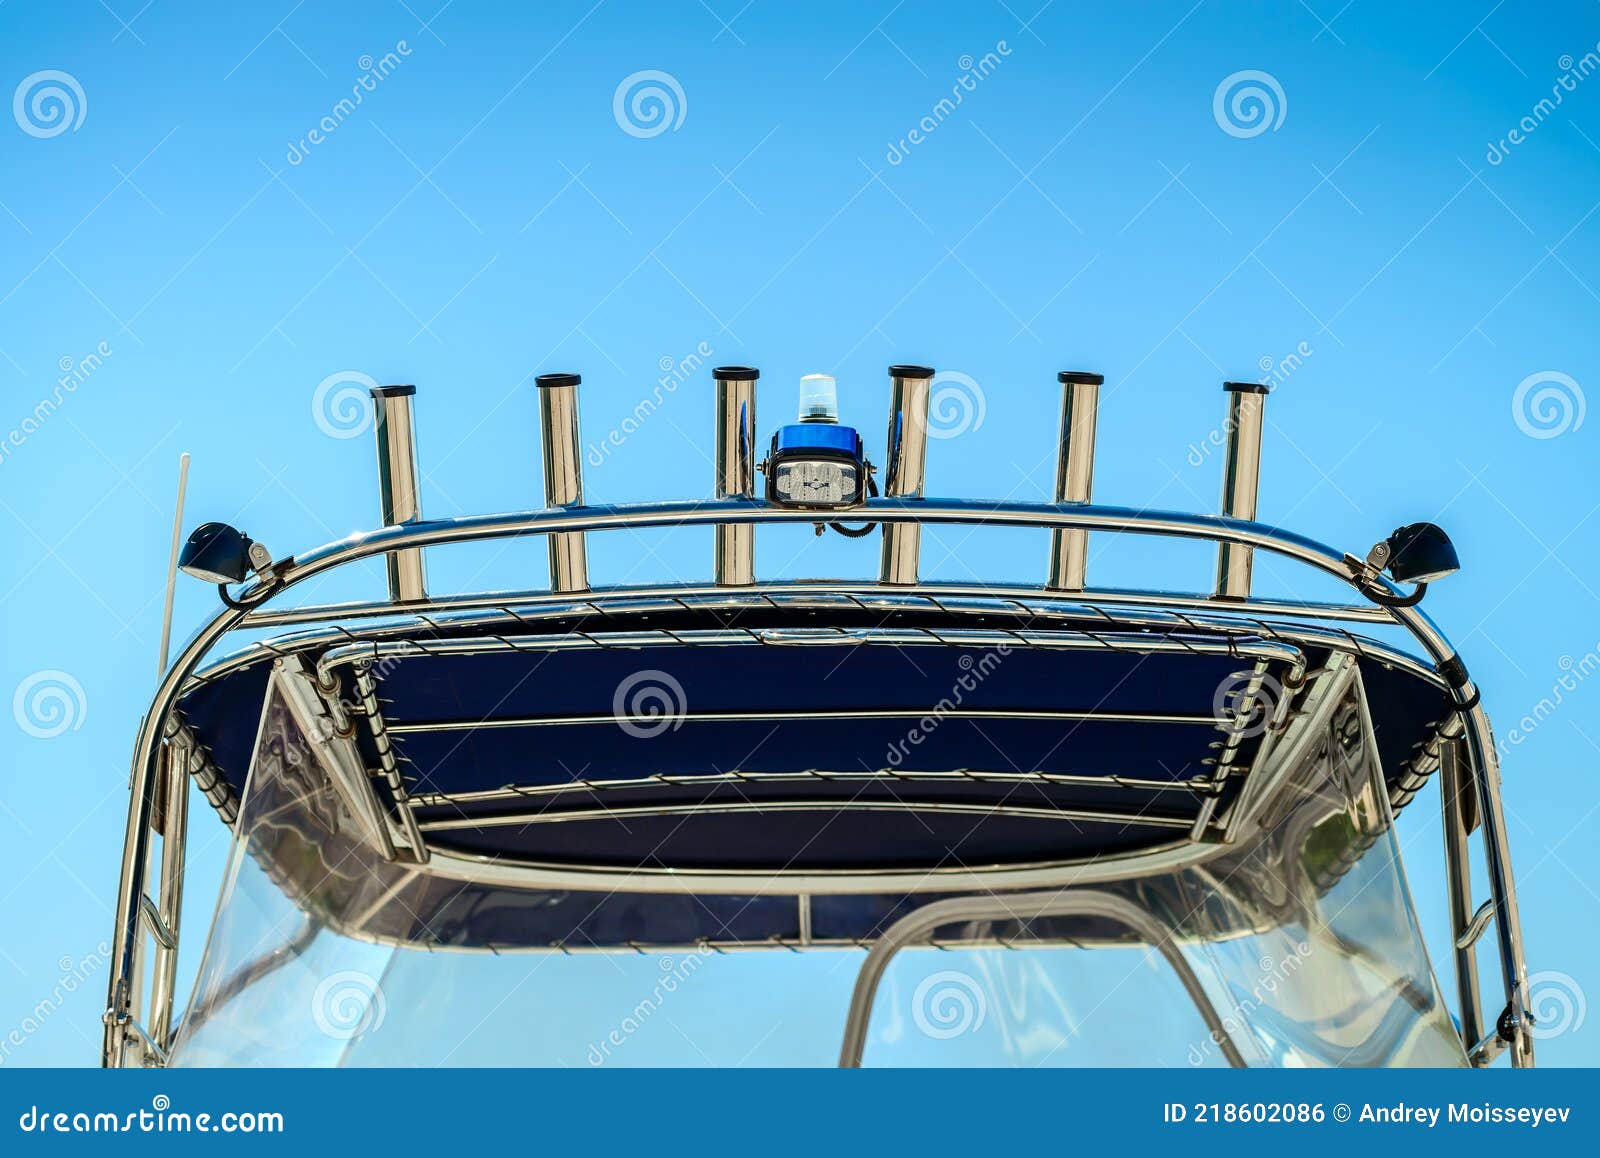 Boat Fishing Rod Holders on Top of the Boat Stock Photo - Image of  equipment, storage: 218602086